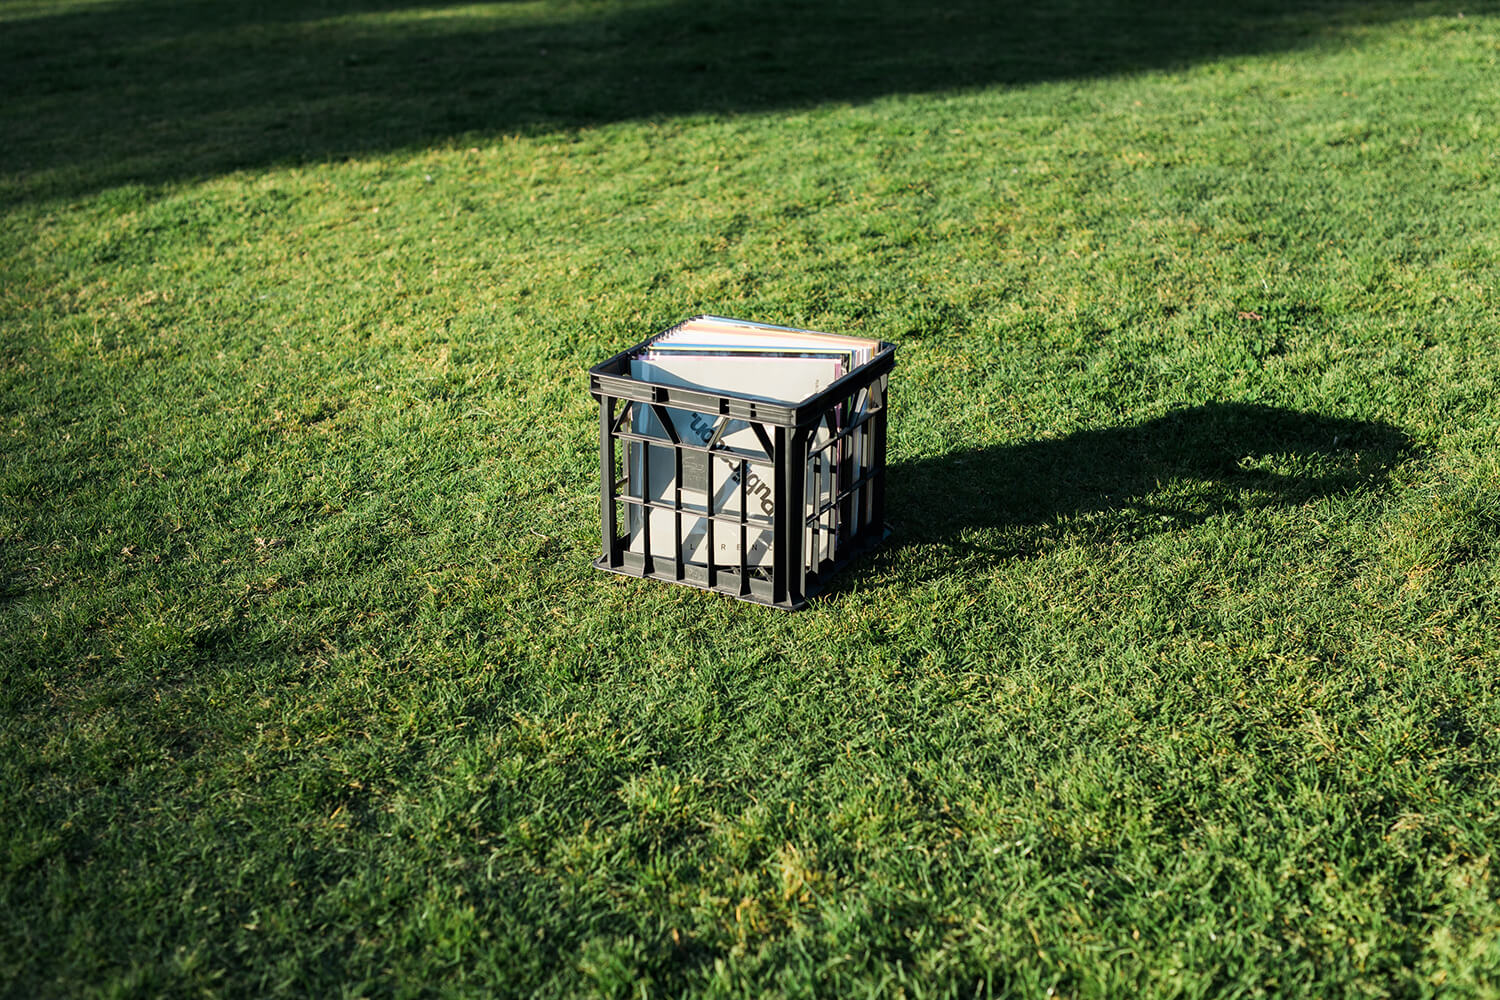 Crate of records in a field